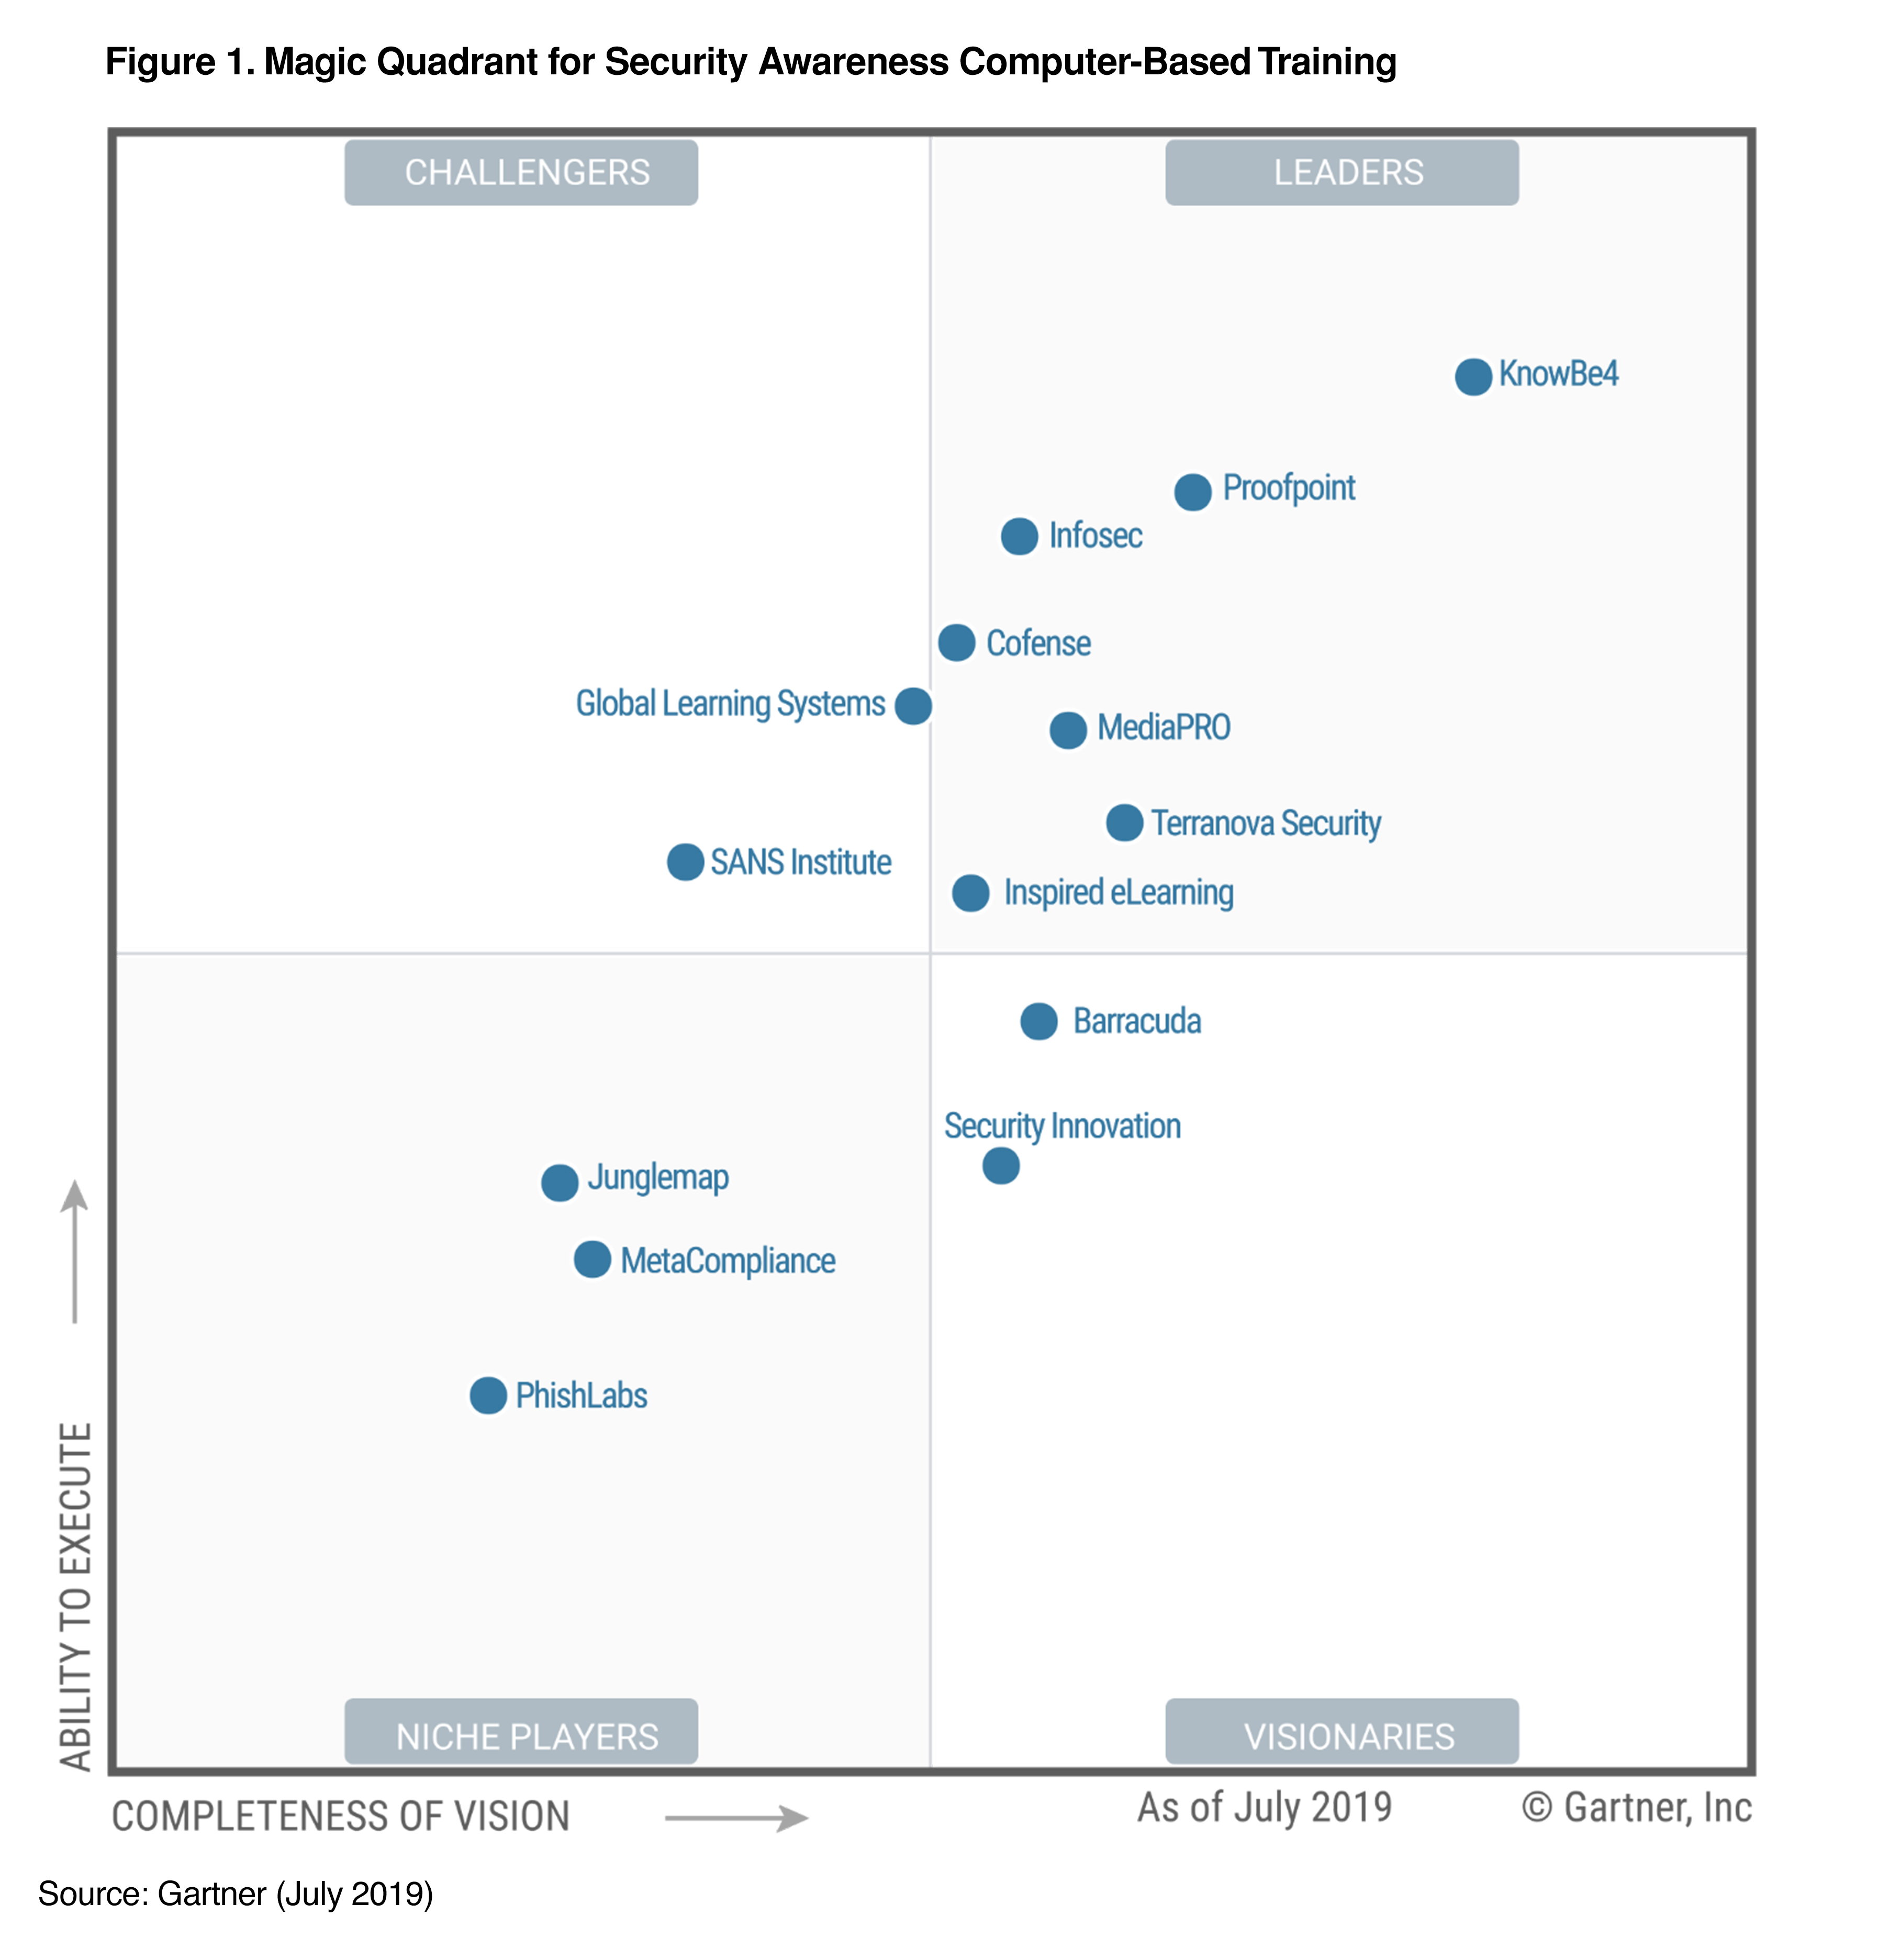 KnowBe4 Positioned as a Leader in the Gartner Magic Quadrant for Third Consecutive Year